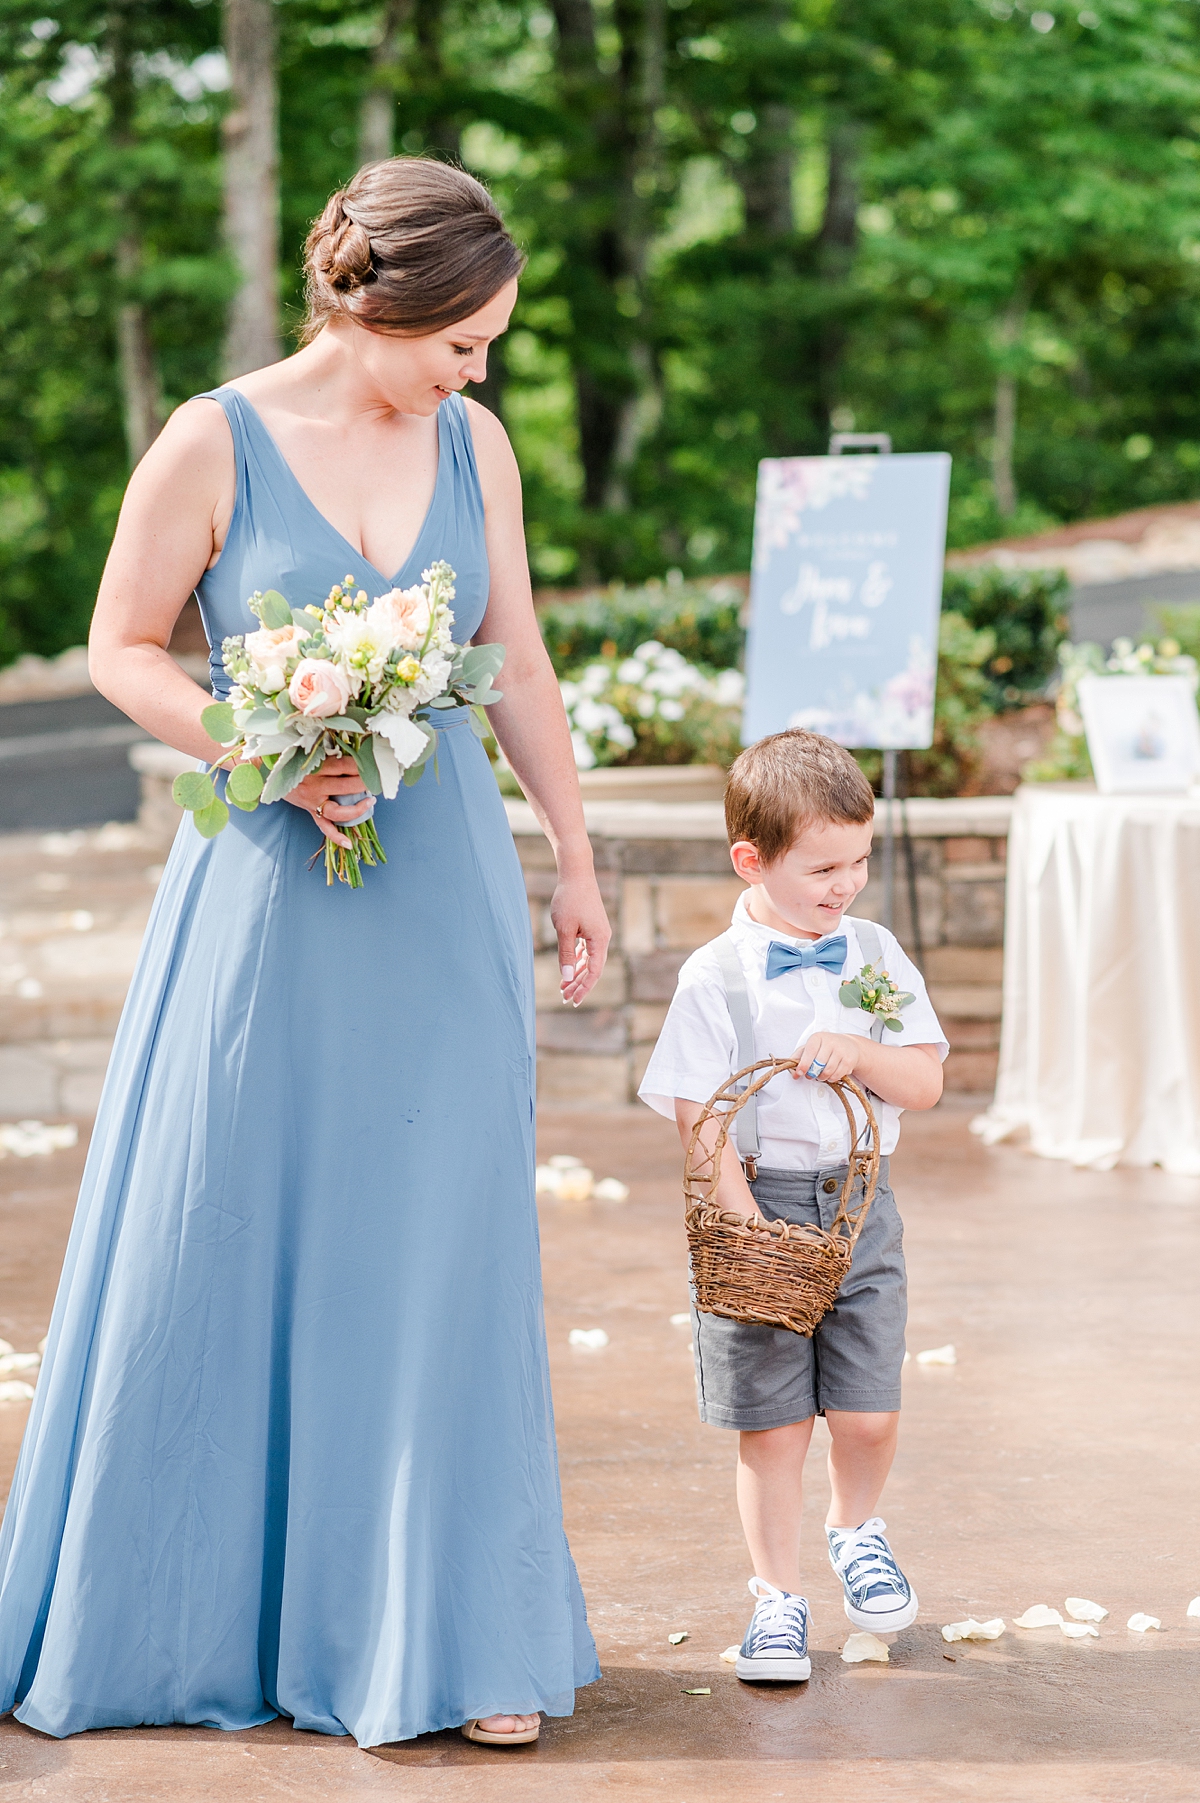 Summer Wedding Ceremony with Mountain Views at The Magnolia Venue in Tennessee. Wedding Photography by Virginia Wedding Photographer Kailey Brianne Photography. 